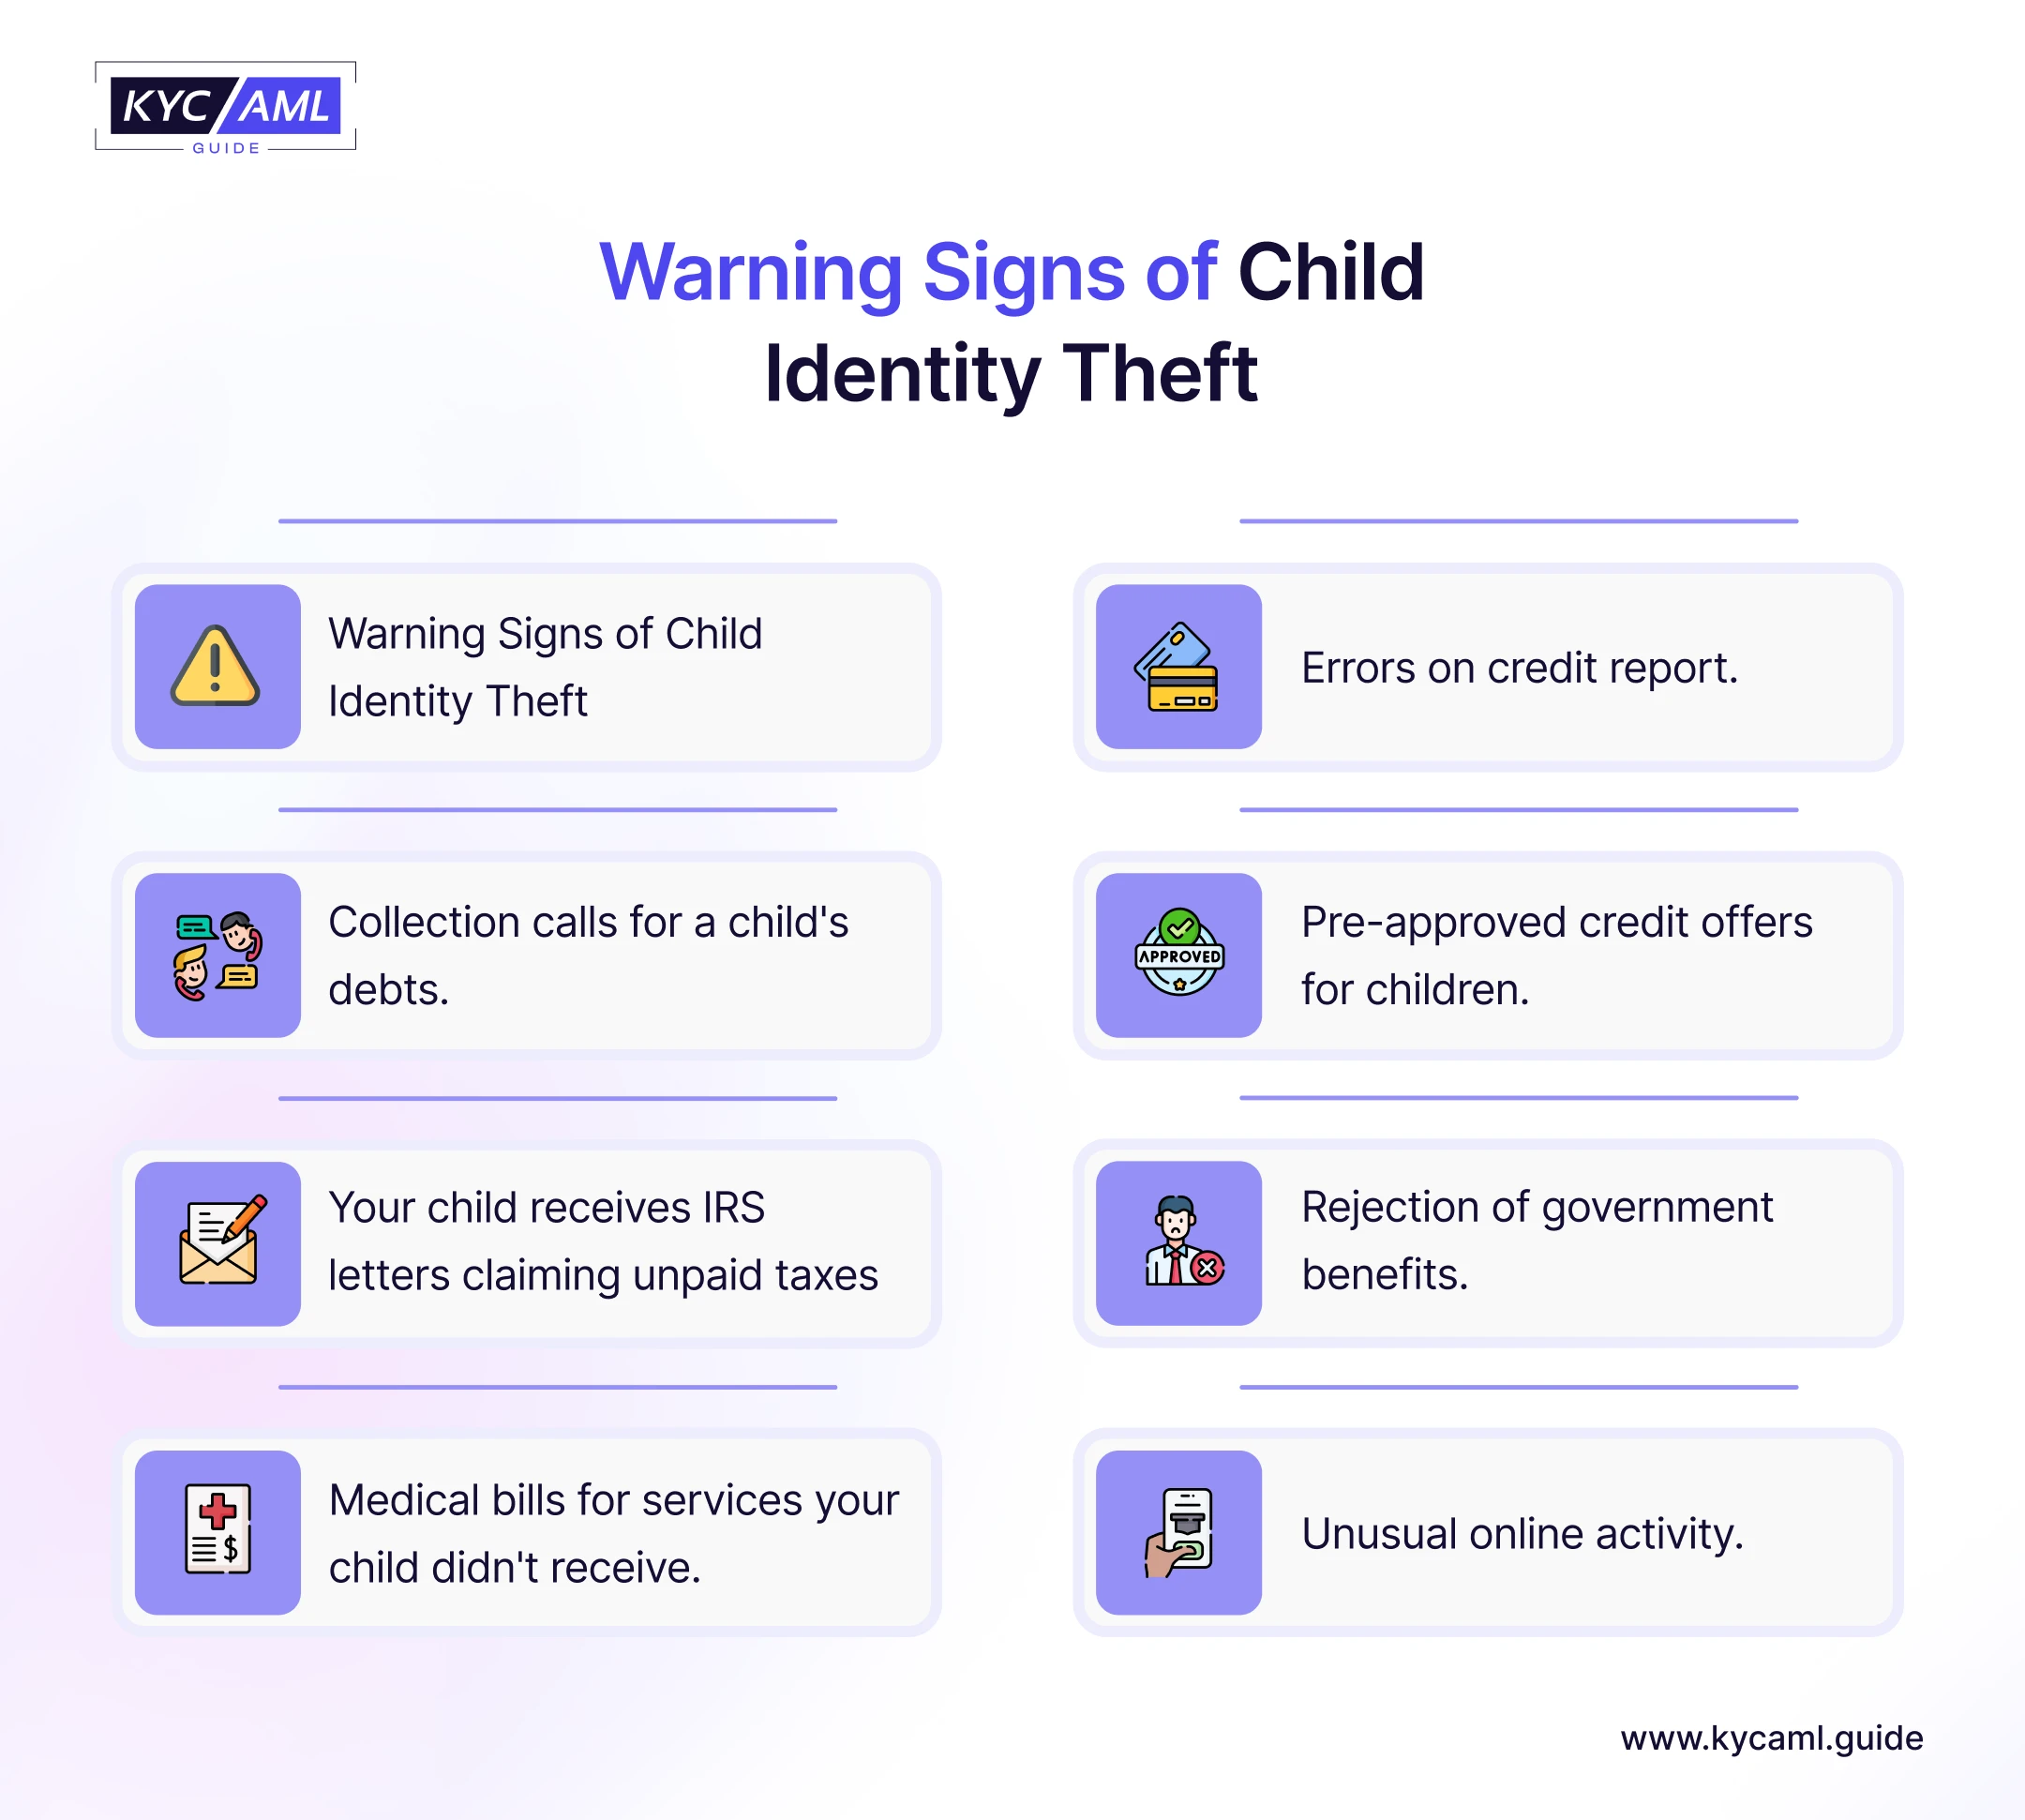 Warning Signs of Child Identity Theft